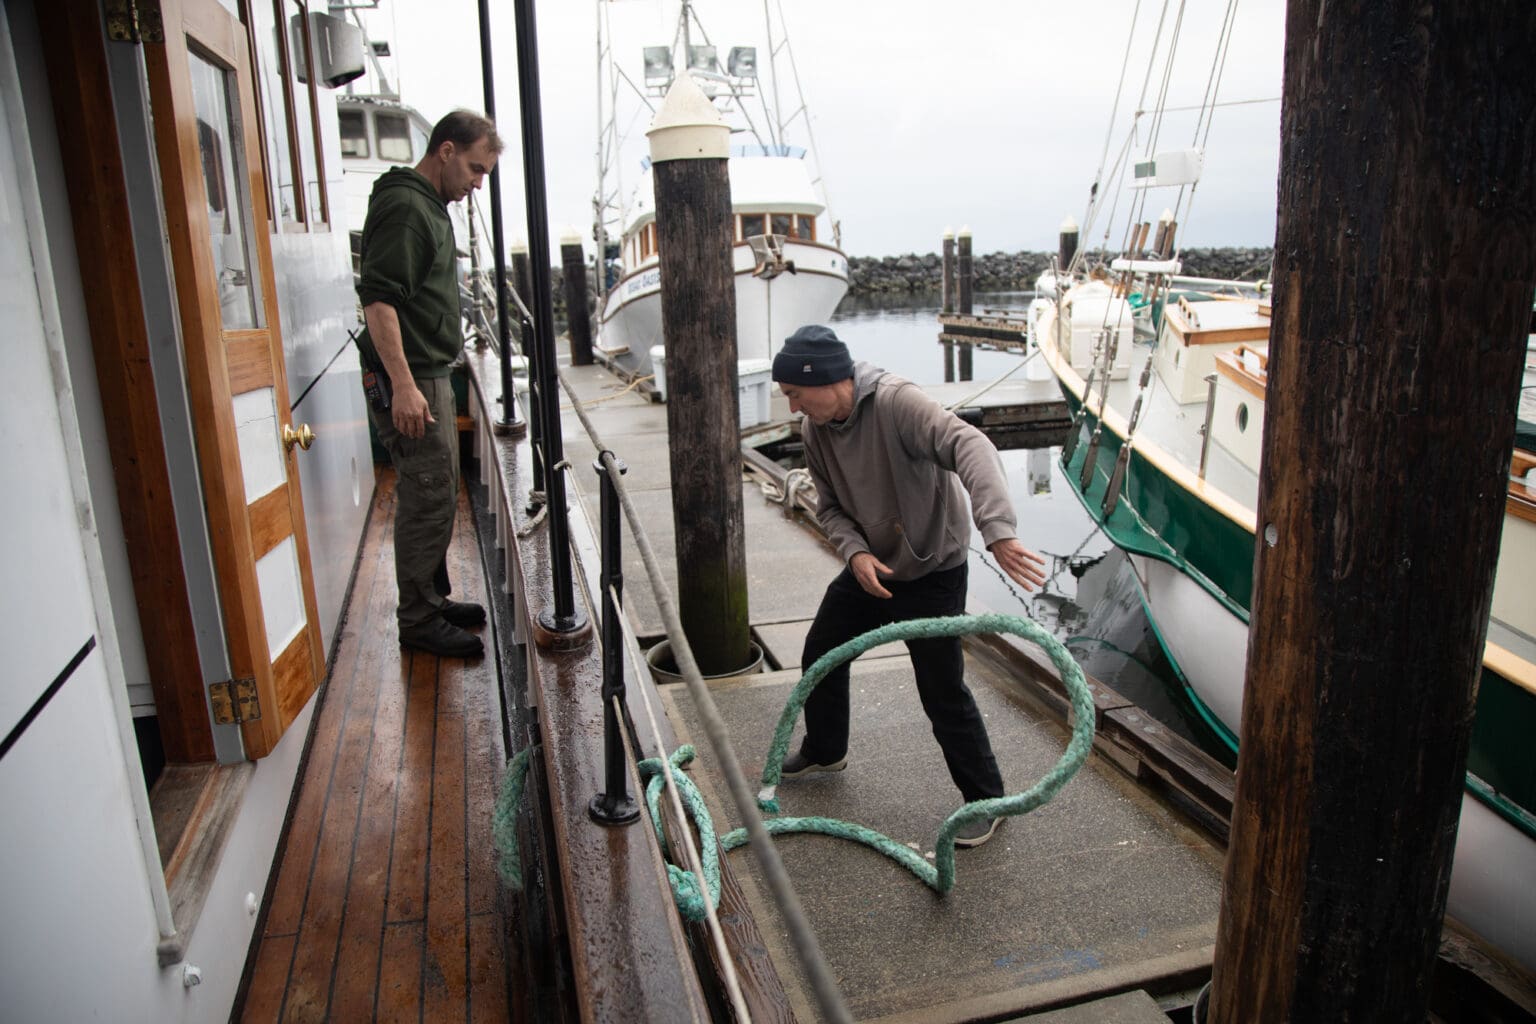 Captain Jeffery Smith, left, and Tom Riley untie the David B from its slip at Squalicum Harbor.